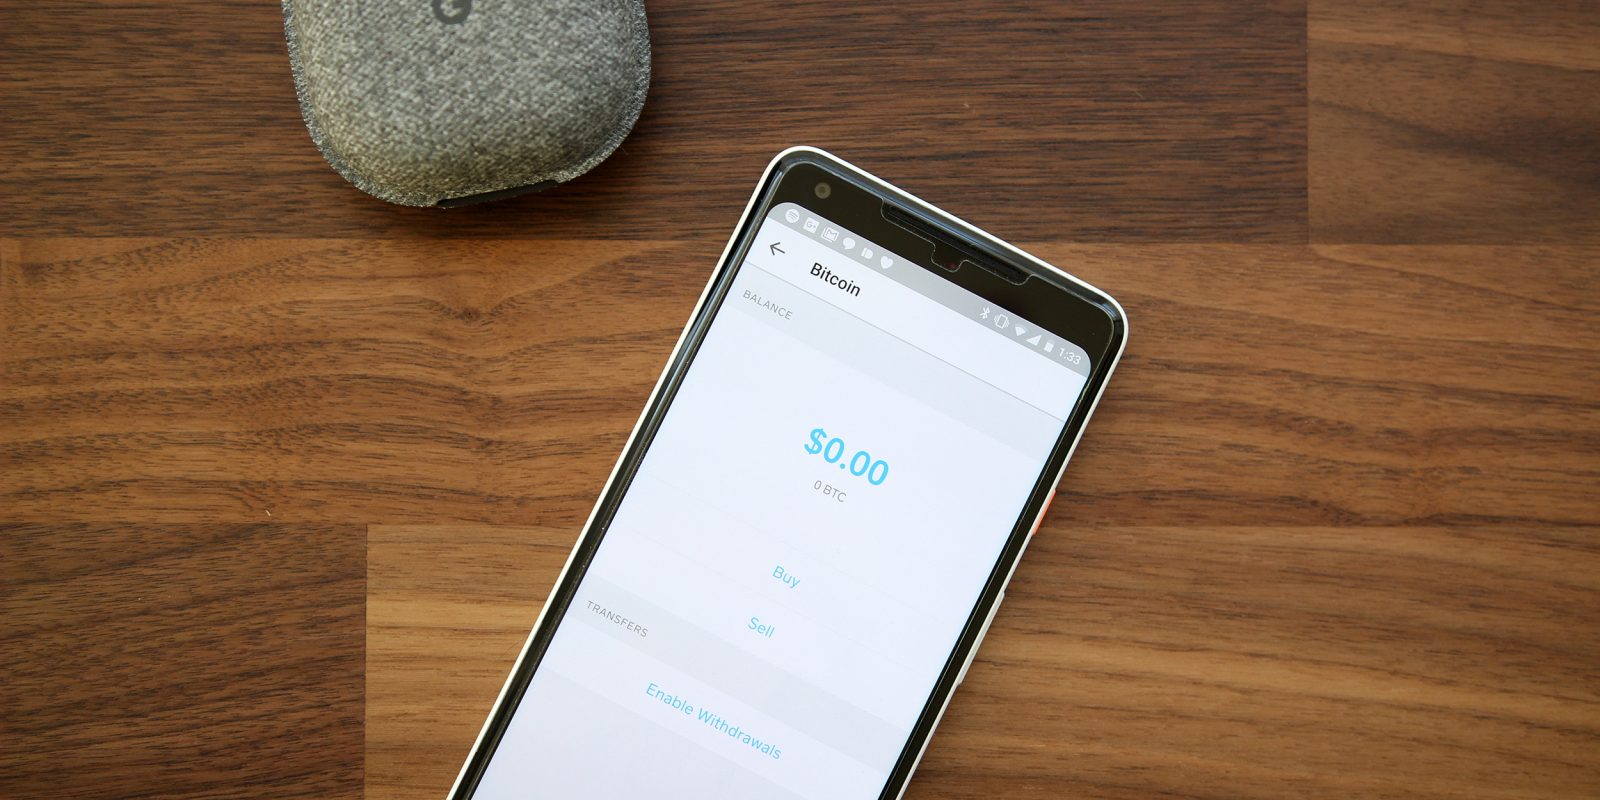 Cash App adds instant buying/selling of Bitcoin on Android - 9to5Google